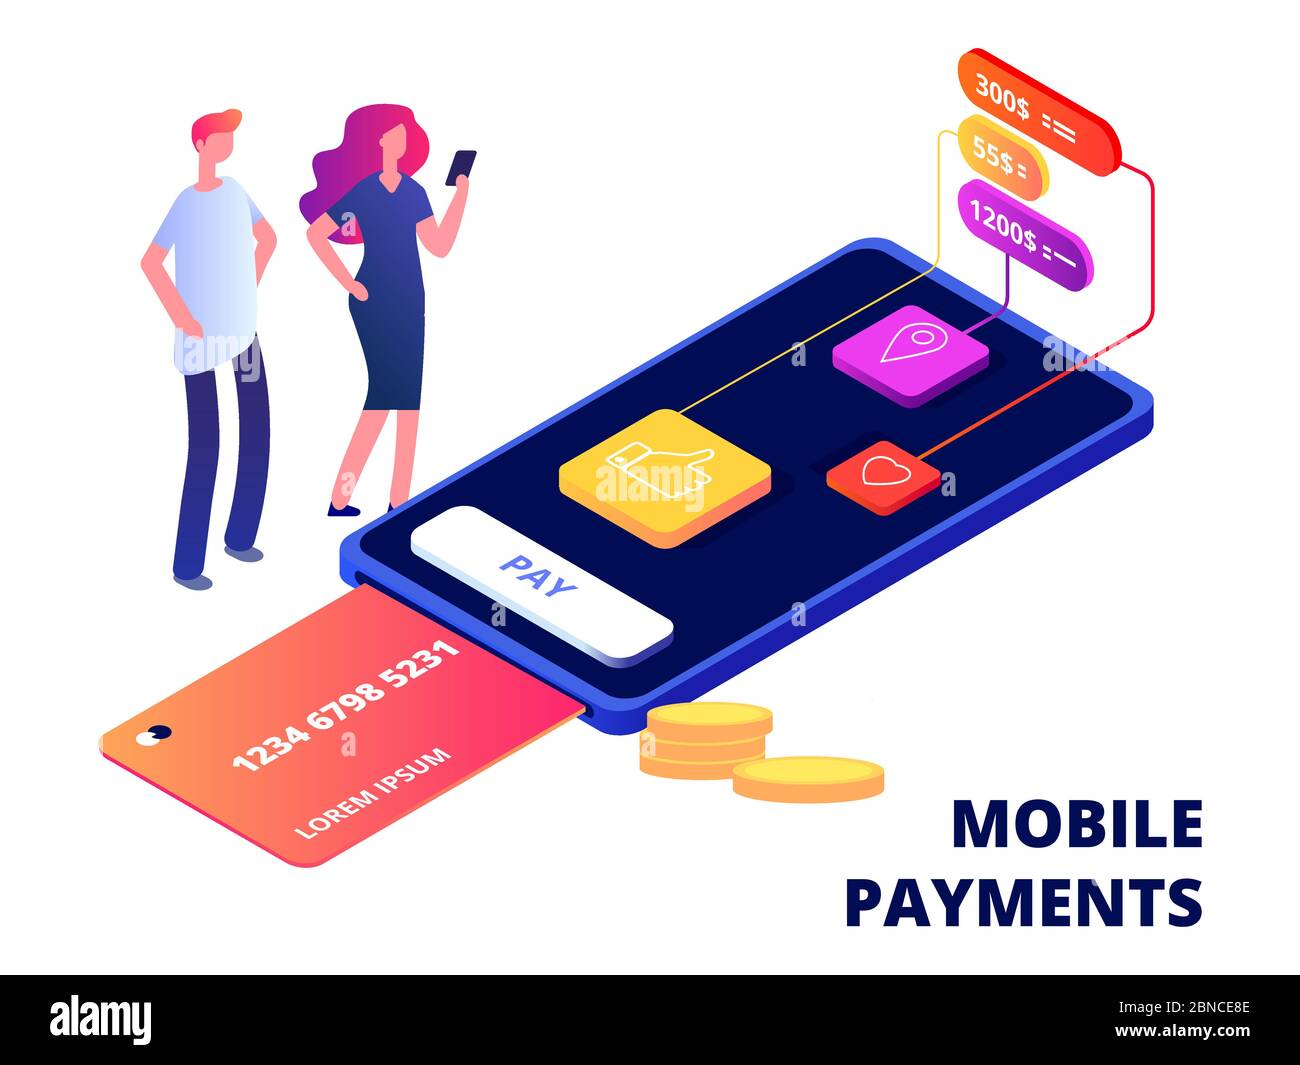 Mobile payments. Smartphone banking app, data protection and security devices vector illustration. Smartphone payment app, pay banking Stock Vector